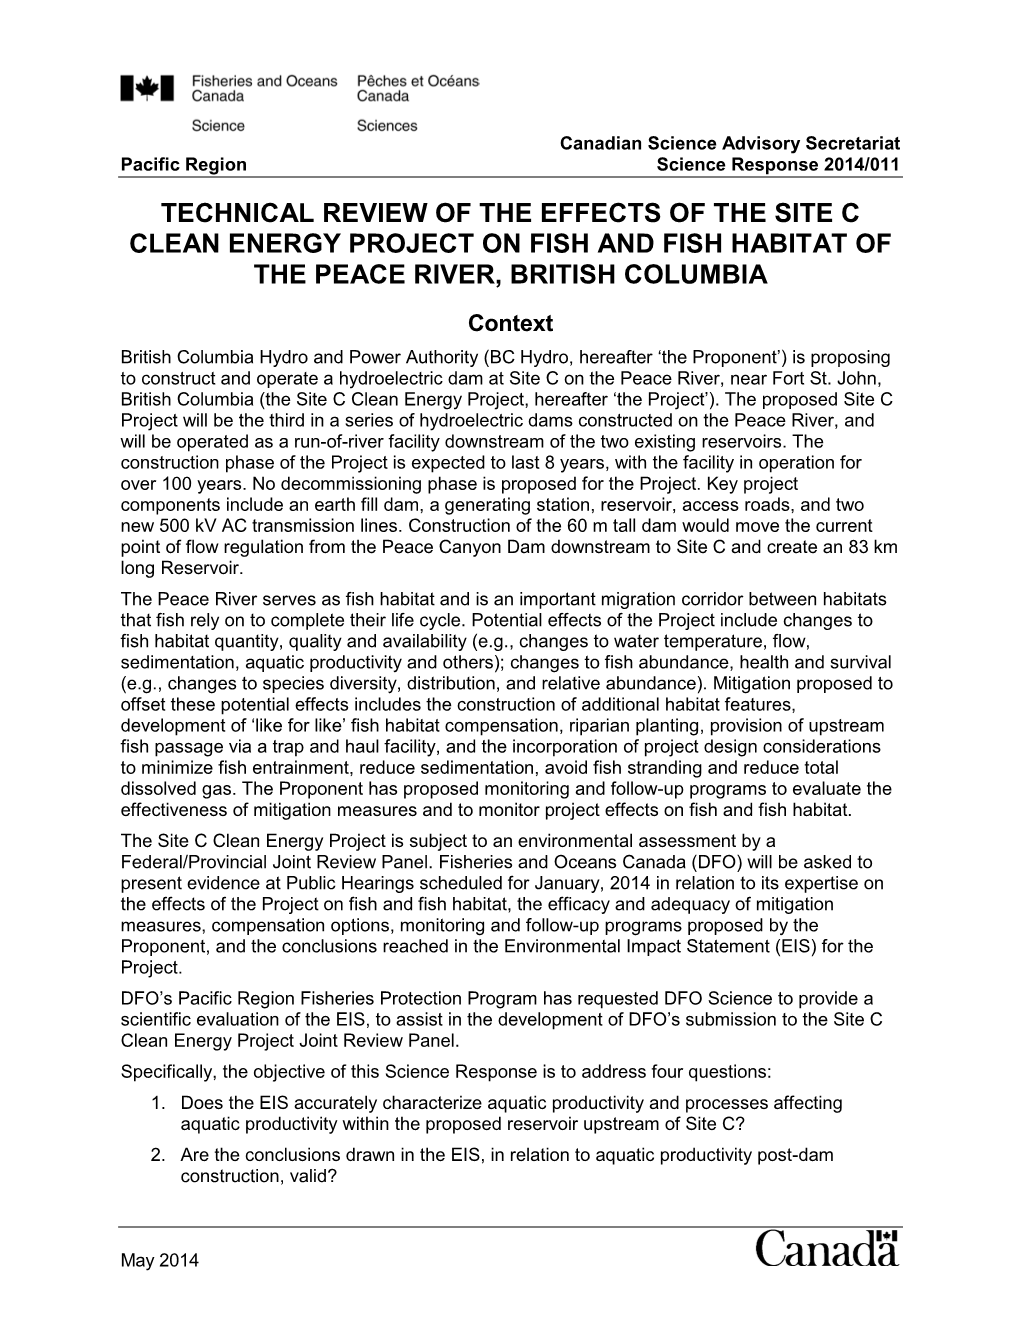 Technical Review of the Effects Of